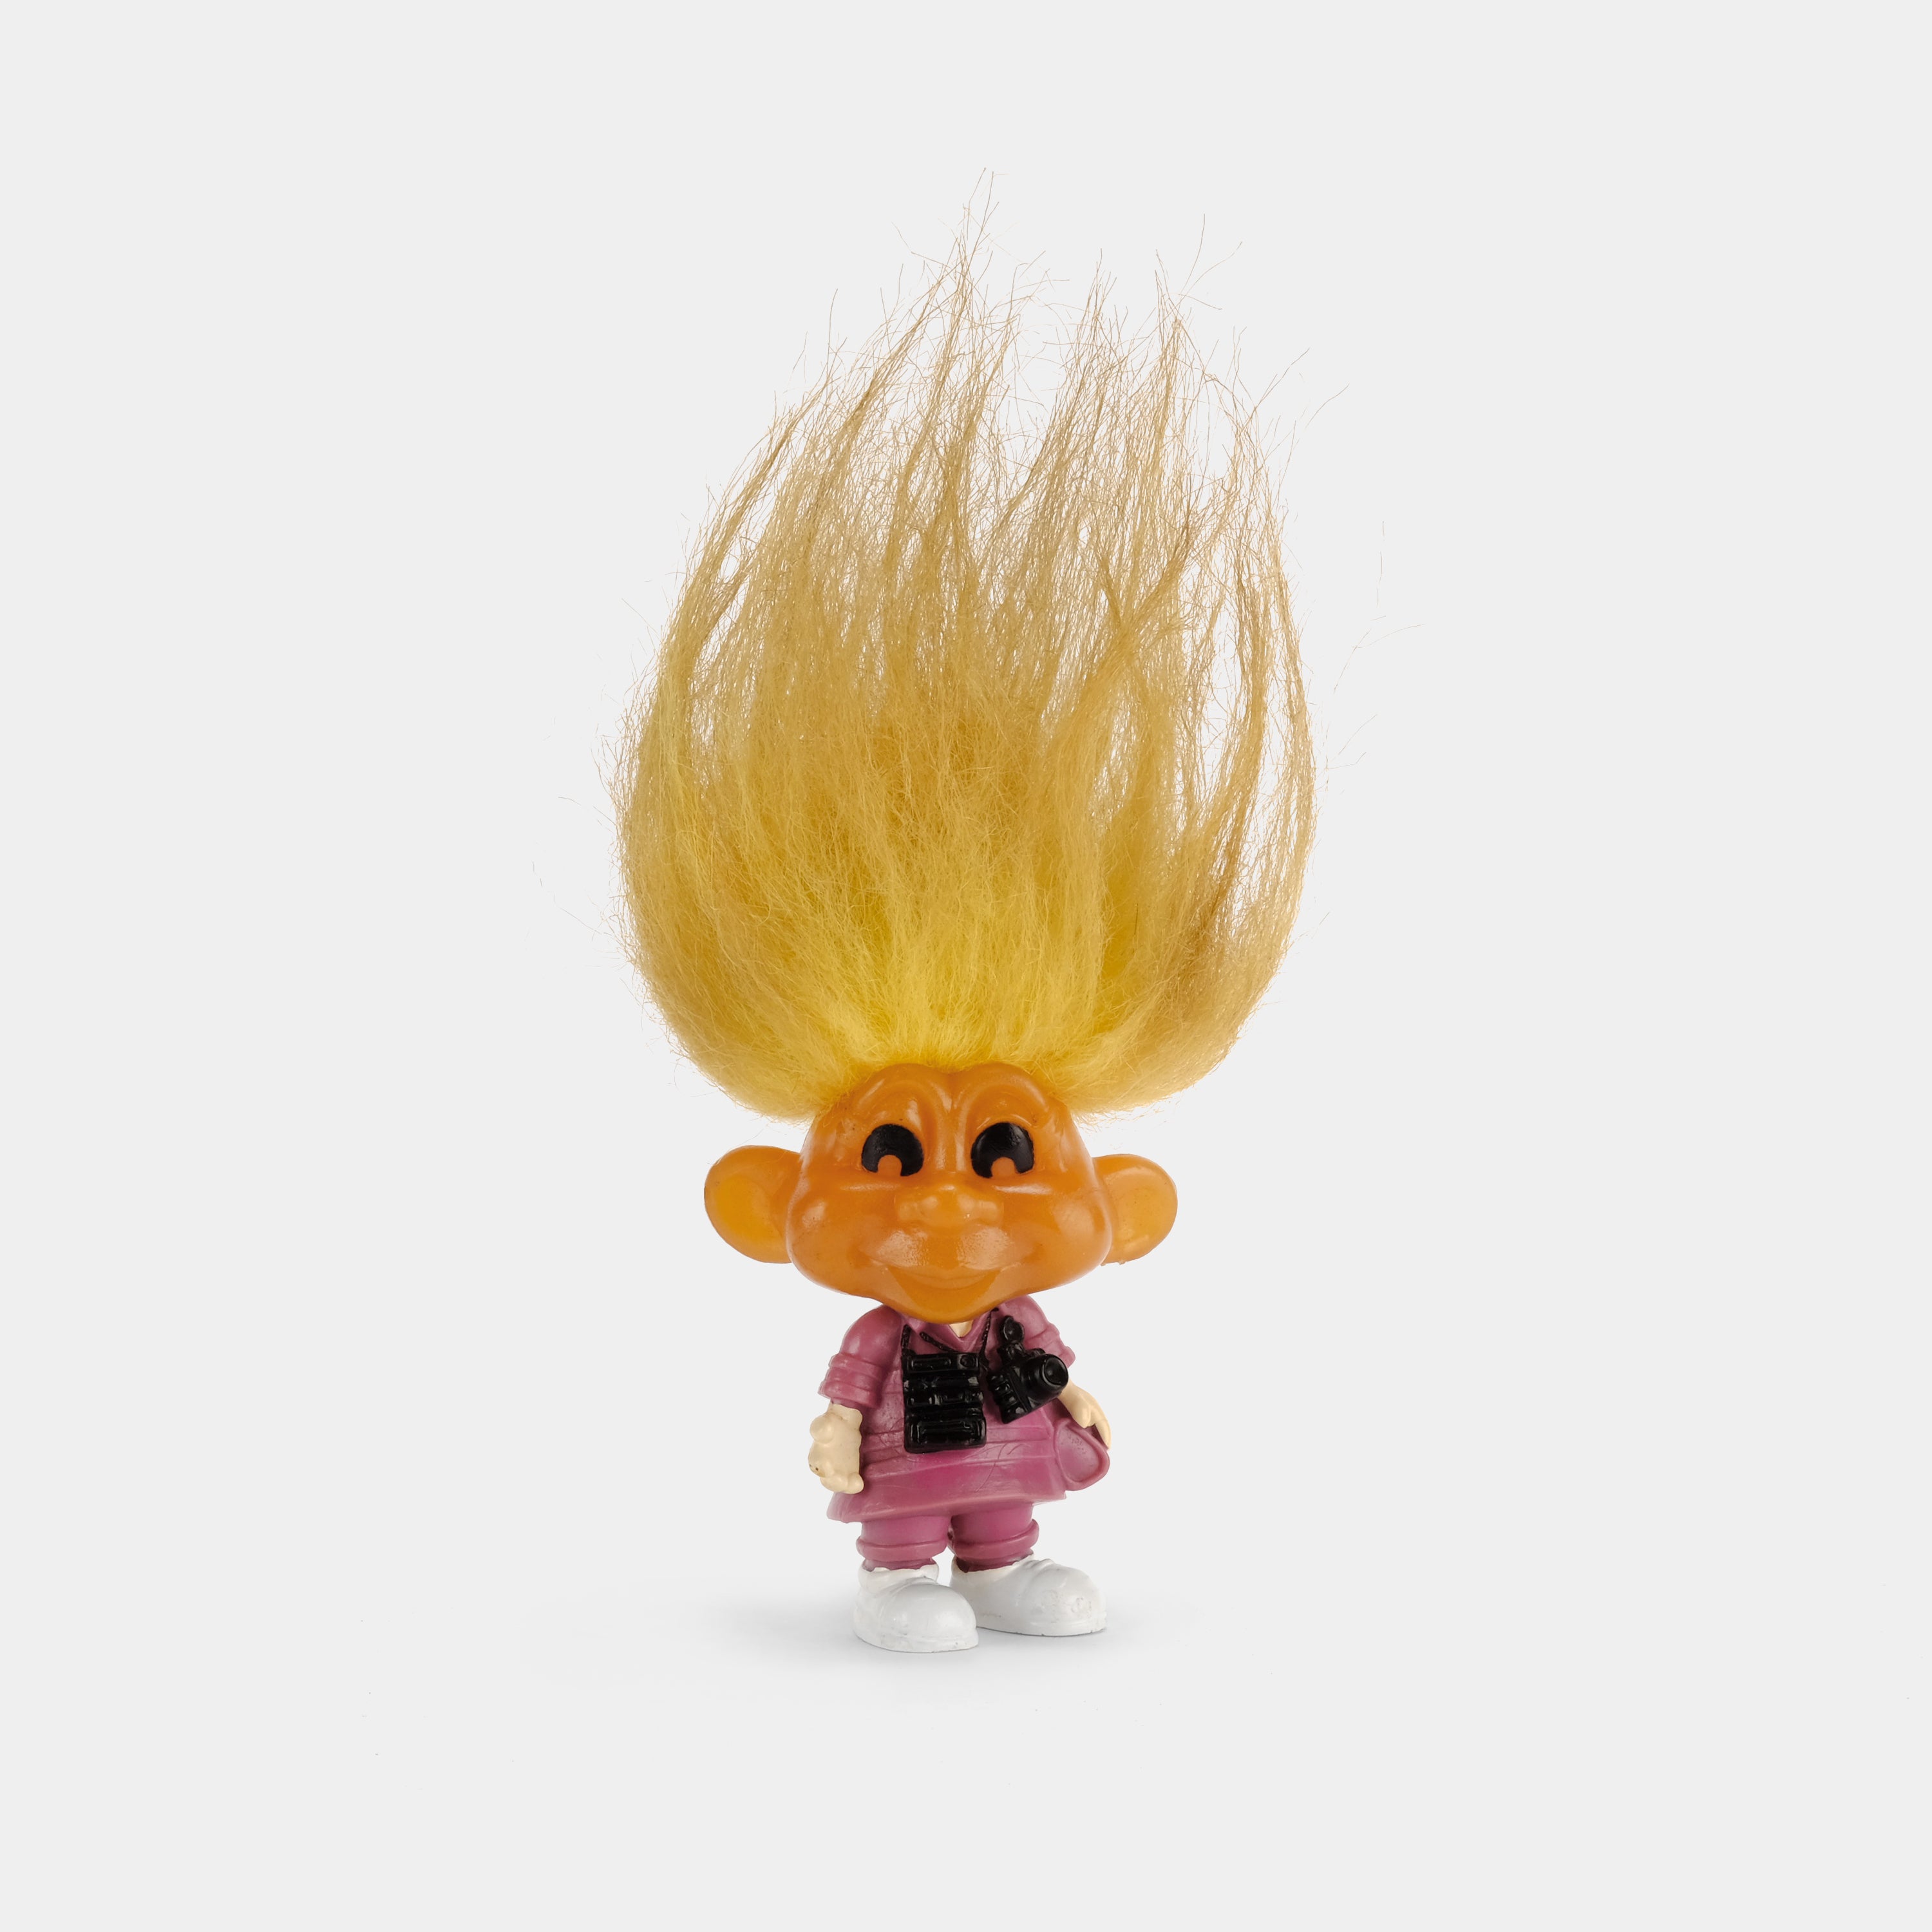 Burger King Kids Club Snaps Troll Doll With Cameras Toy Figurine